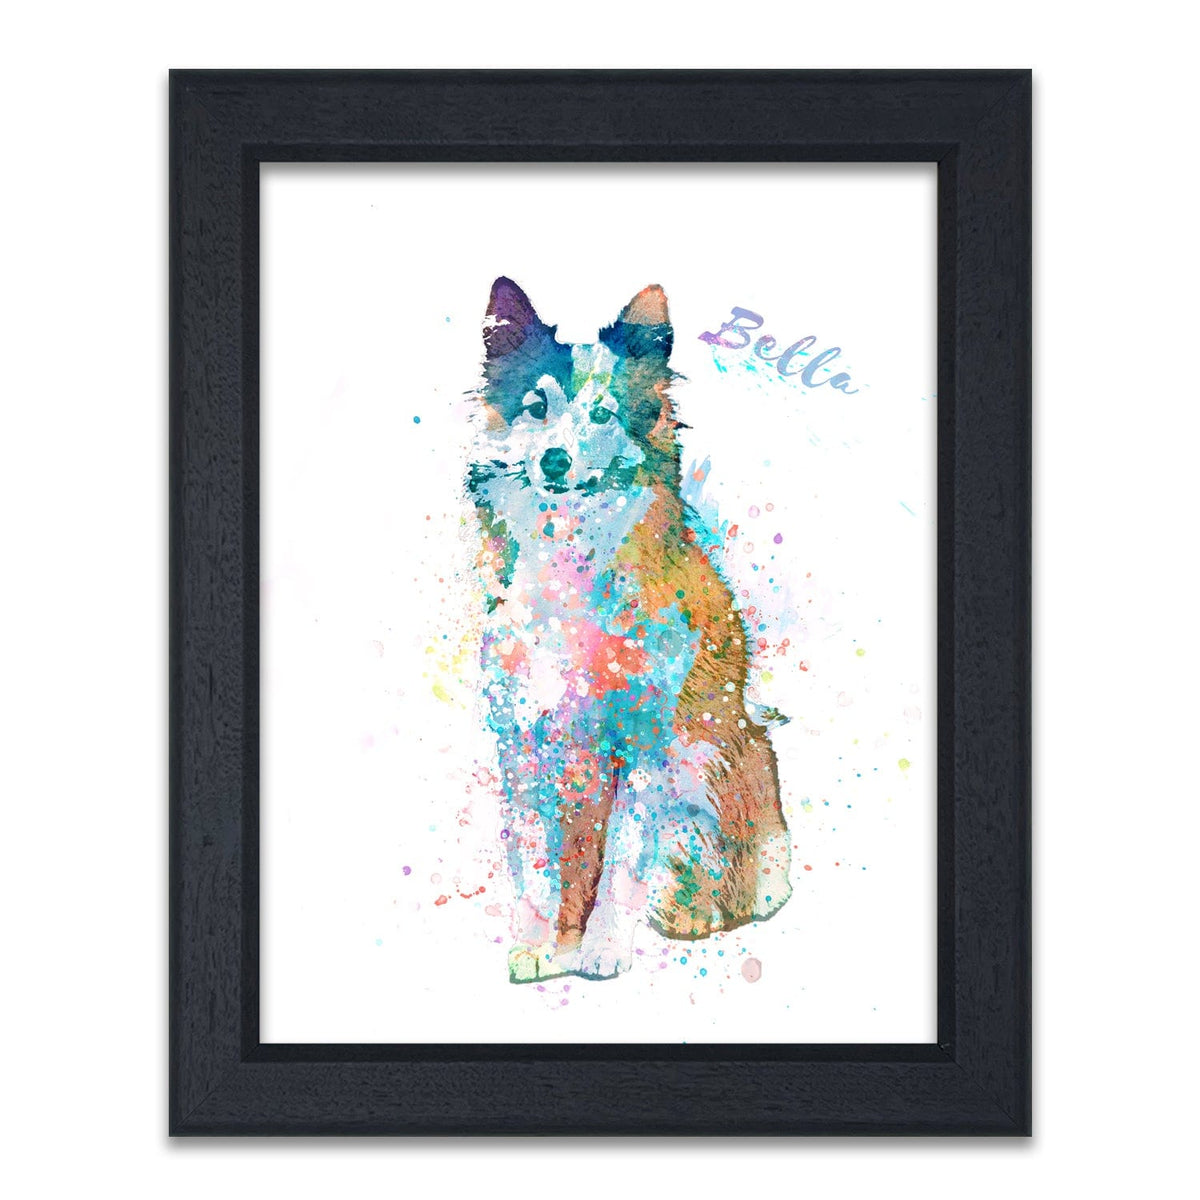 Shetland Sheepdog Framed Art Personalized Gift from Personal-Prints